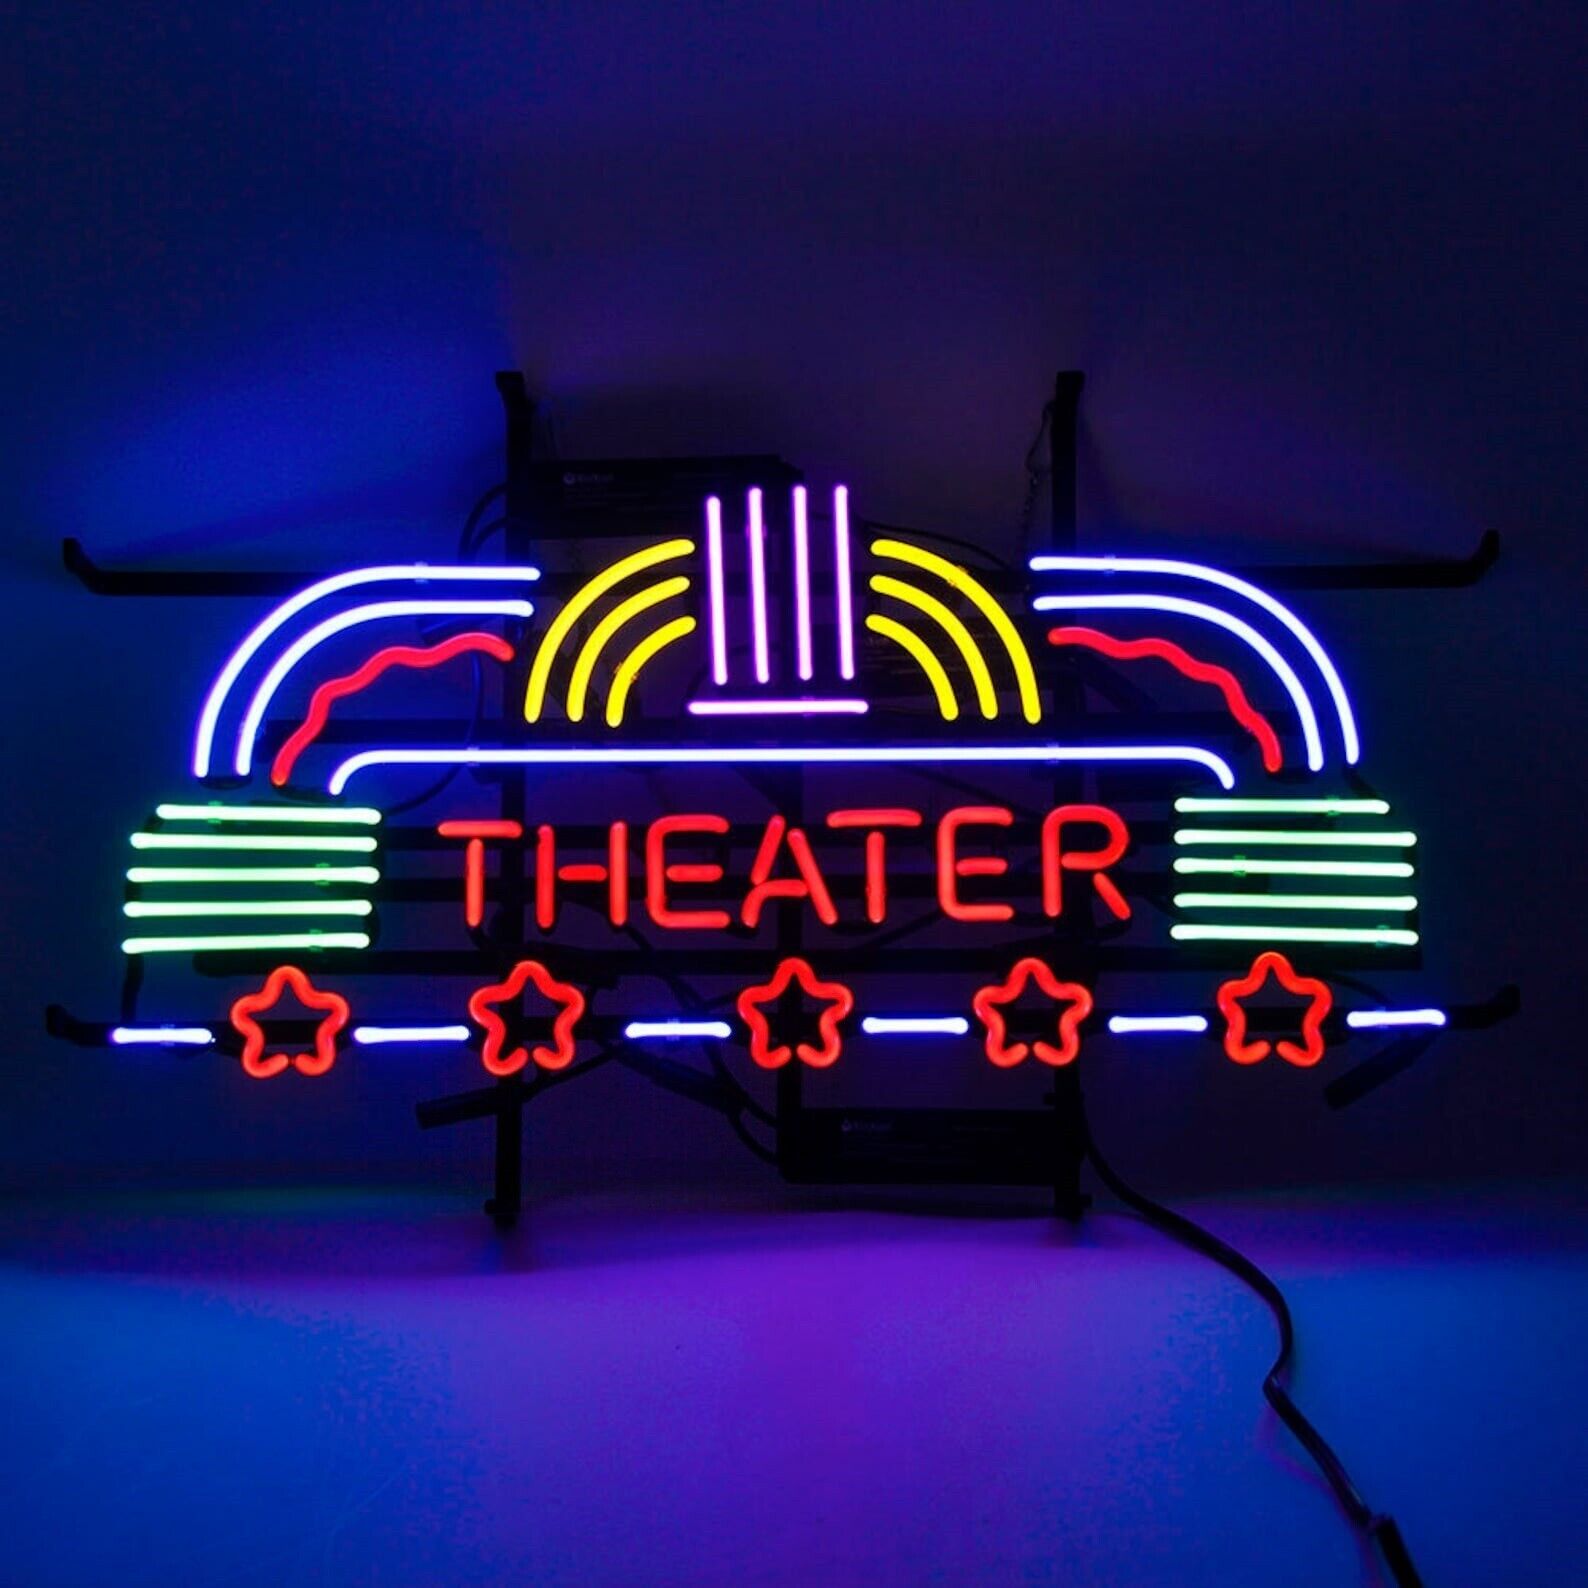 Theater Show Neon Sign 24